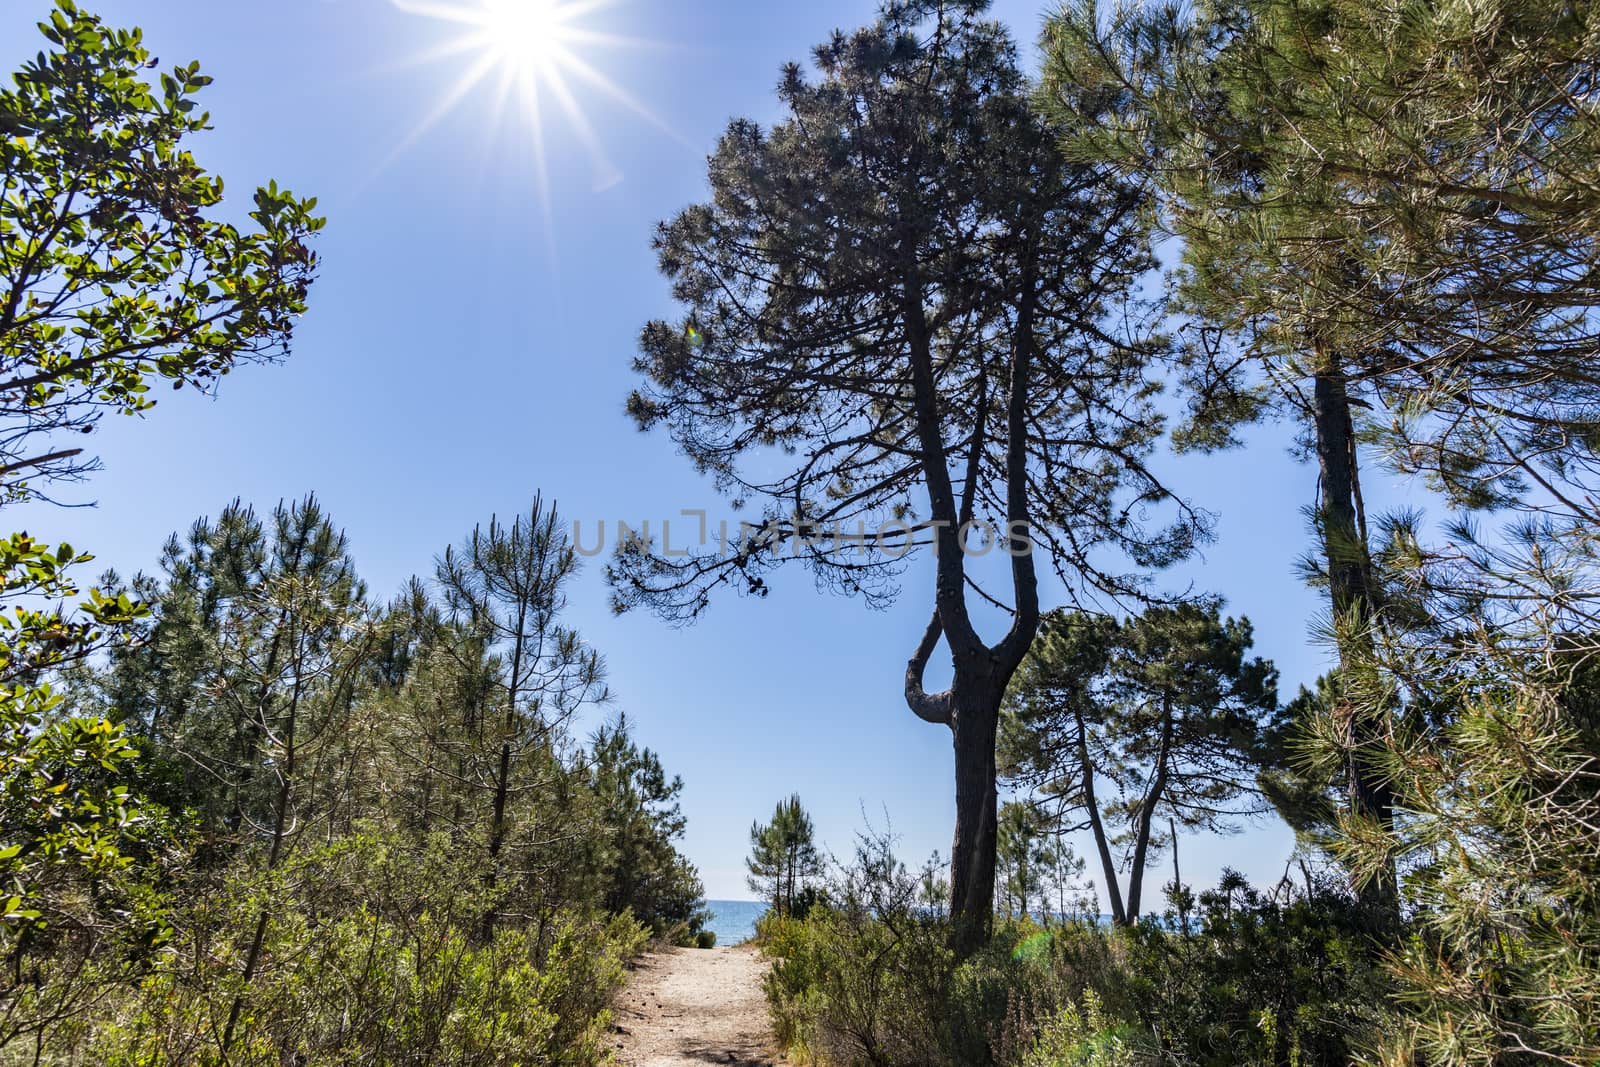 Passage between pine trees going to a beach with blue sky and sun in contre-jour, Ghisonaccia, Corsica, France, Europe